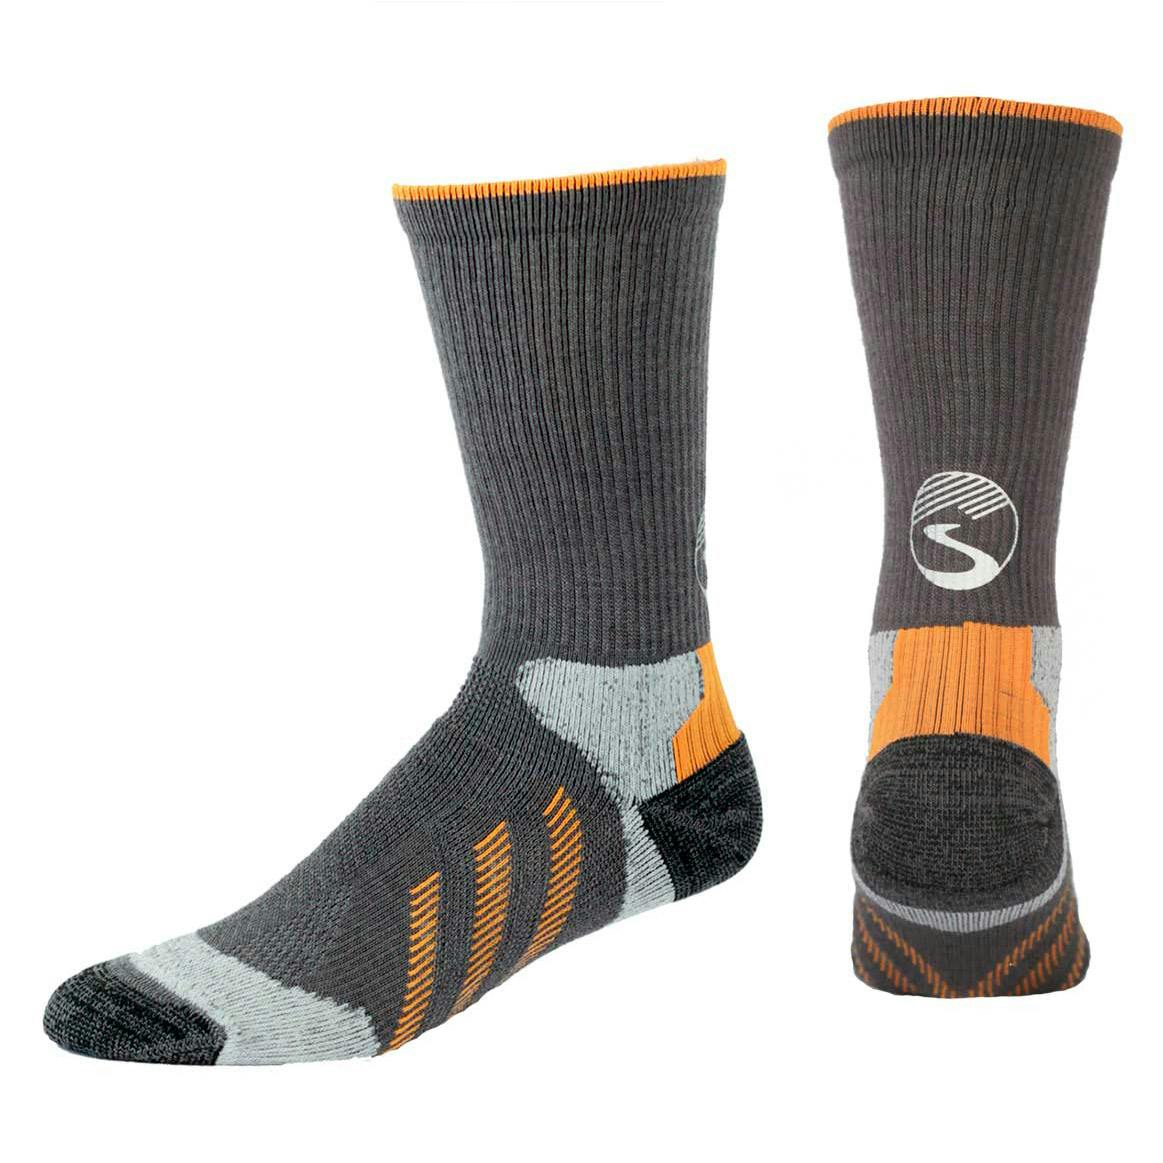 https://s3.amazonaws.com/activejunky/images/products/showers-pass-torch-sock.jpg